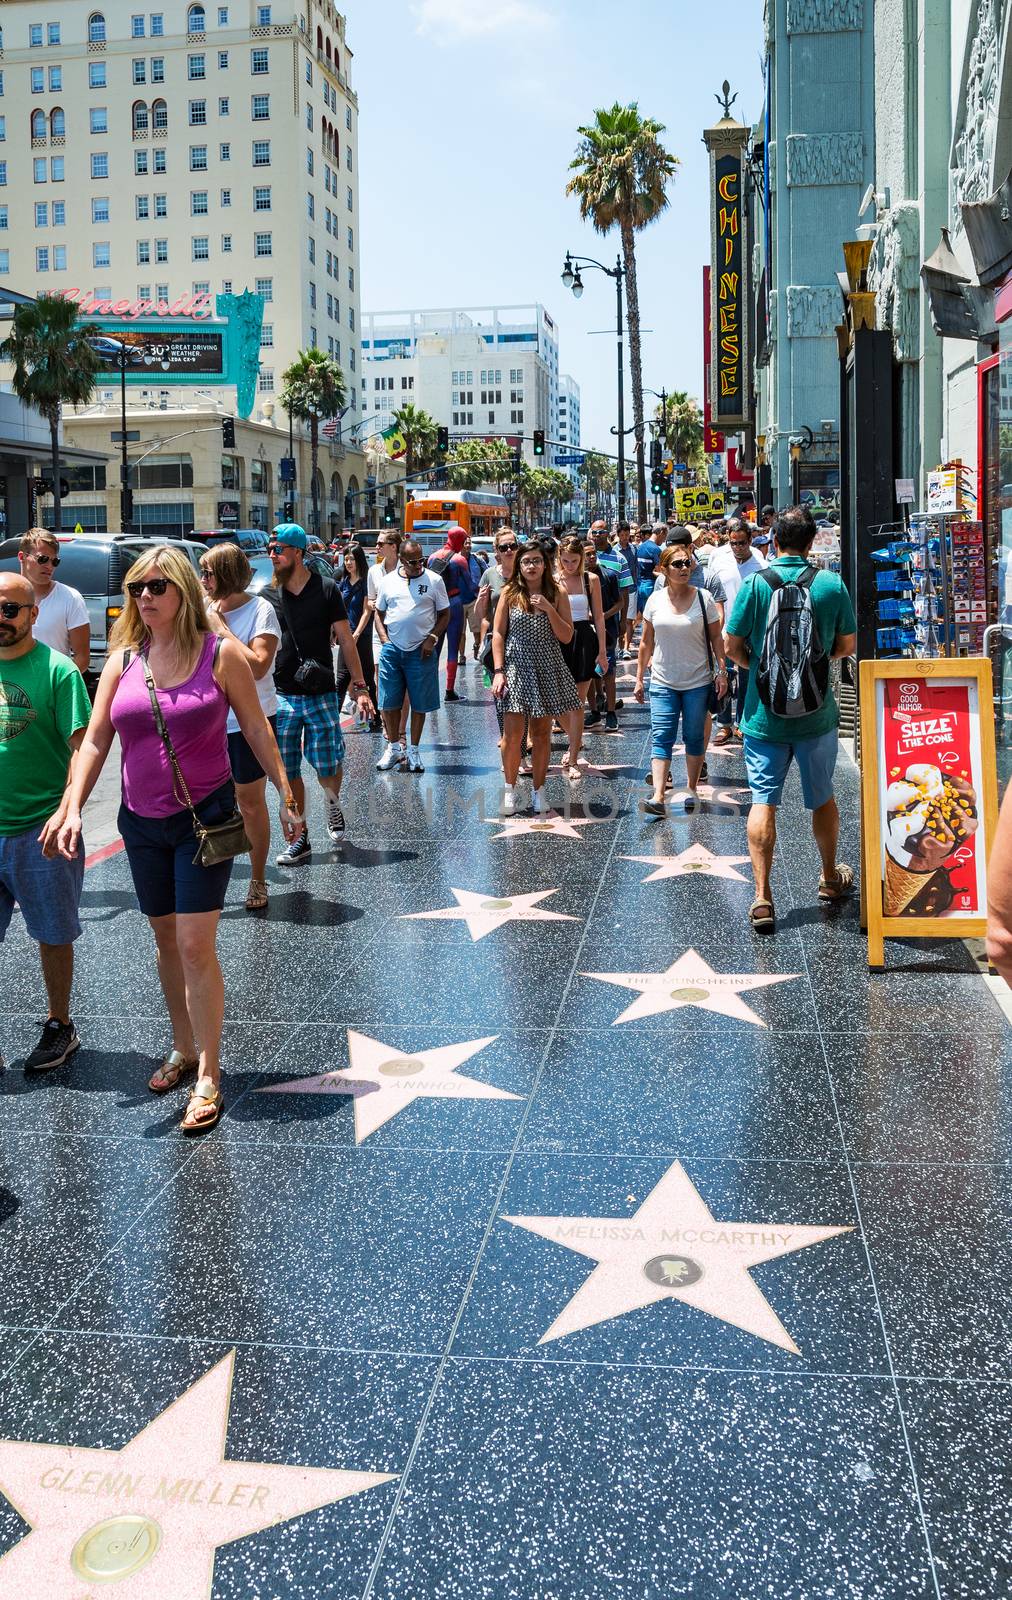 LOS ANGELES, USA - AUGUST 5, 2016: Walk of Fame on Hollywood Boulevard on August 5th 2016.